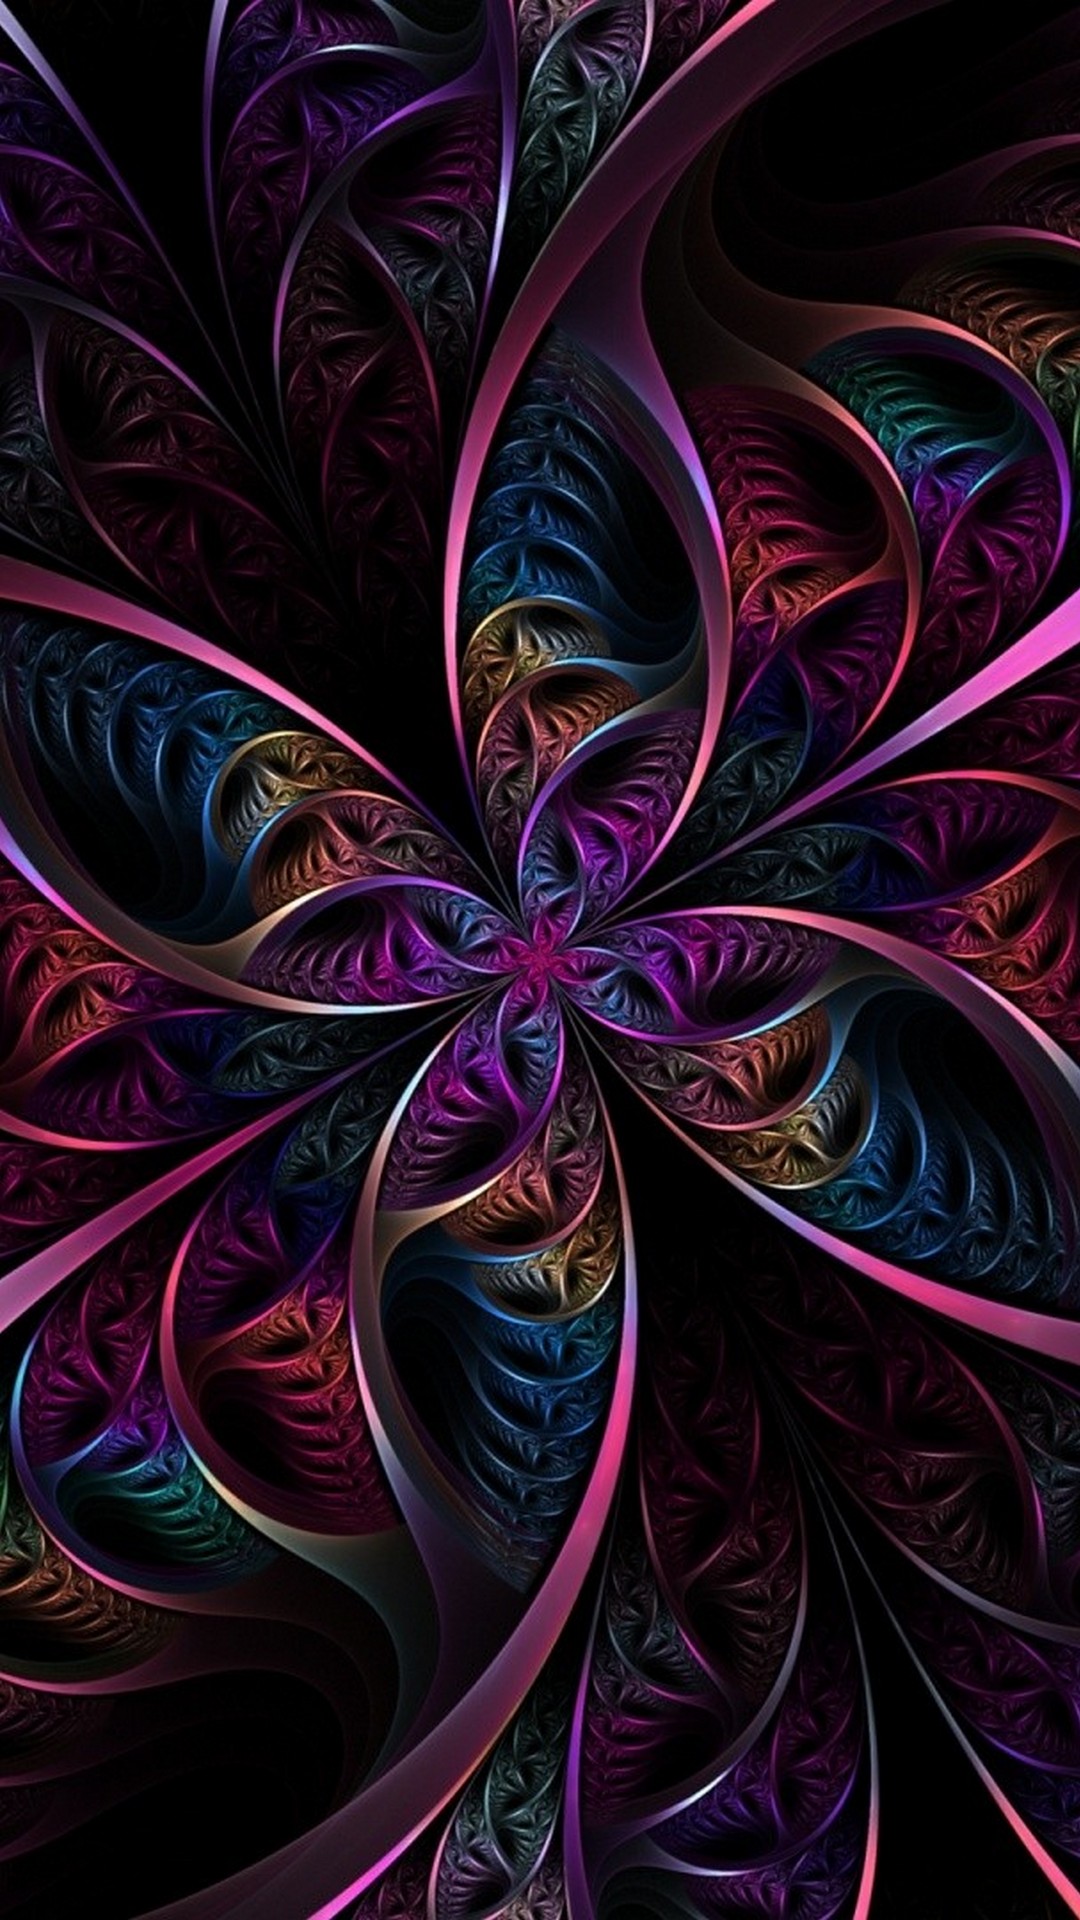 Psychedelic Art iPhone Wallpaper with HD Resolution 1080X1920